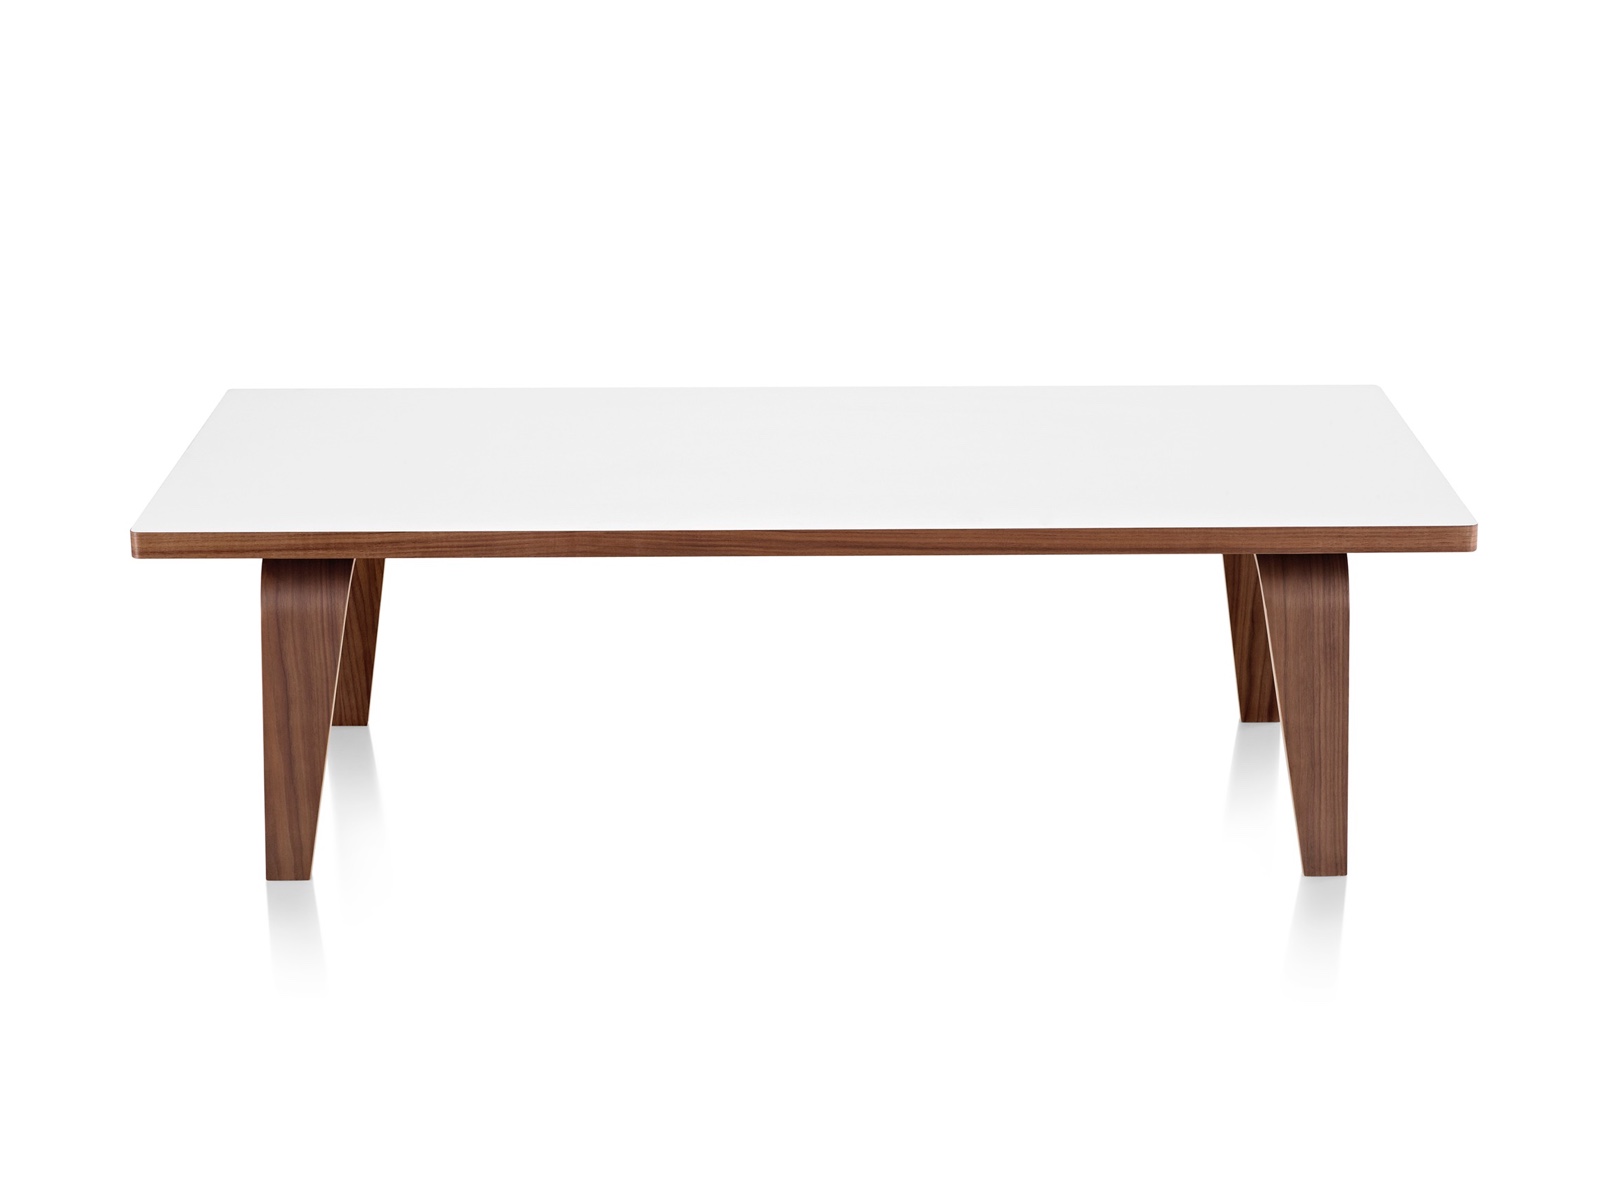 An Eames Rectangular Coffee Table with a white top and molded plywood legs in a medium finish. 